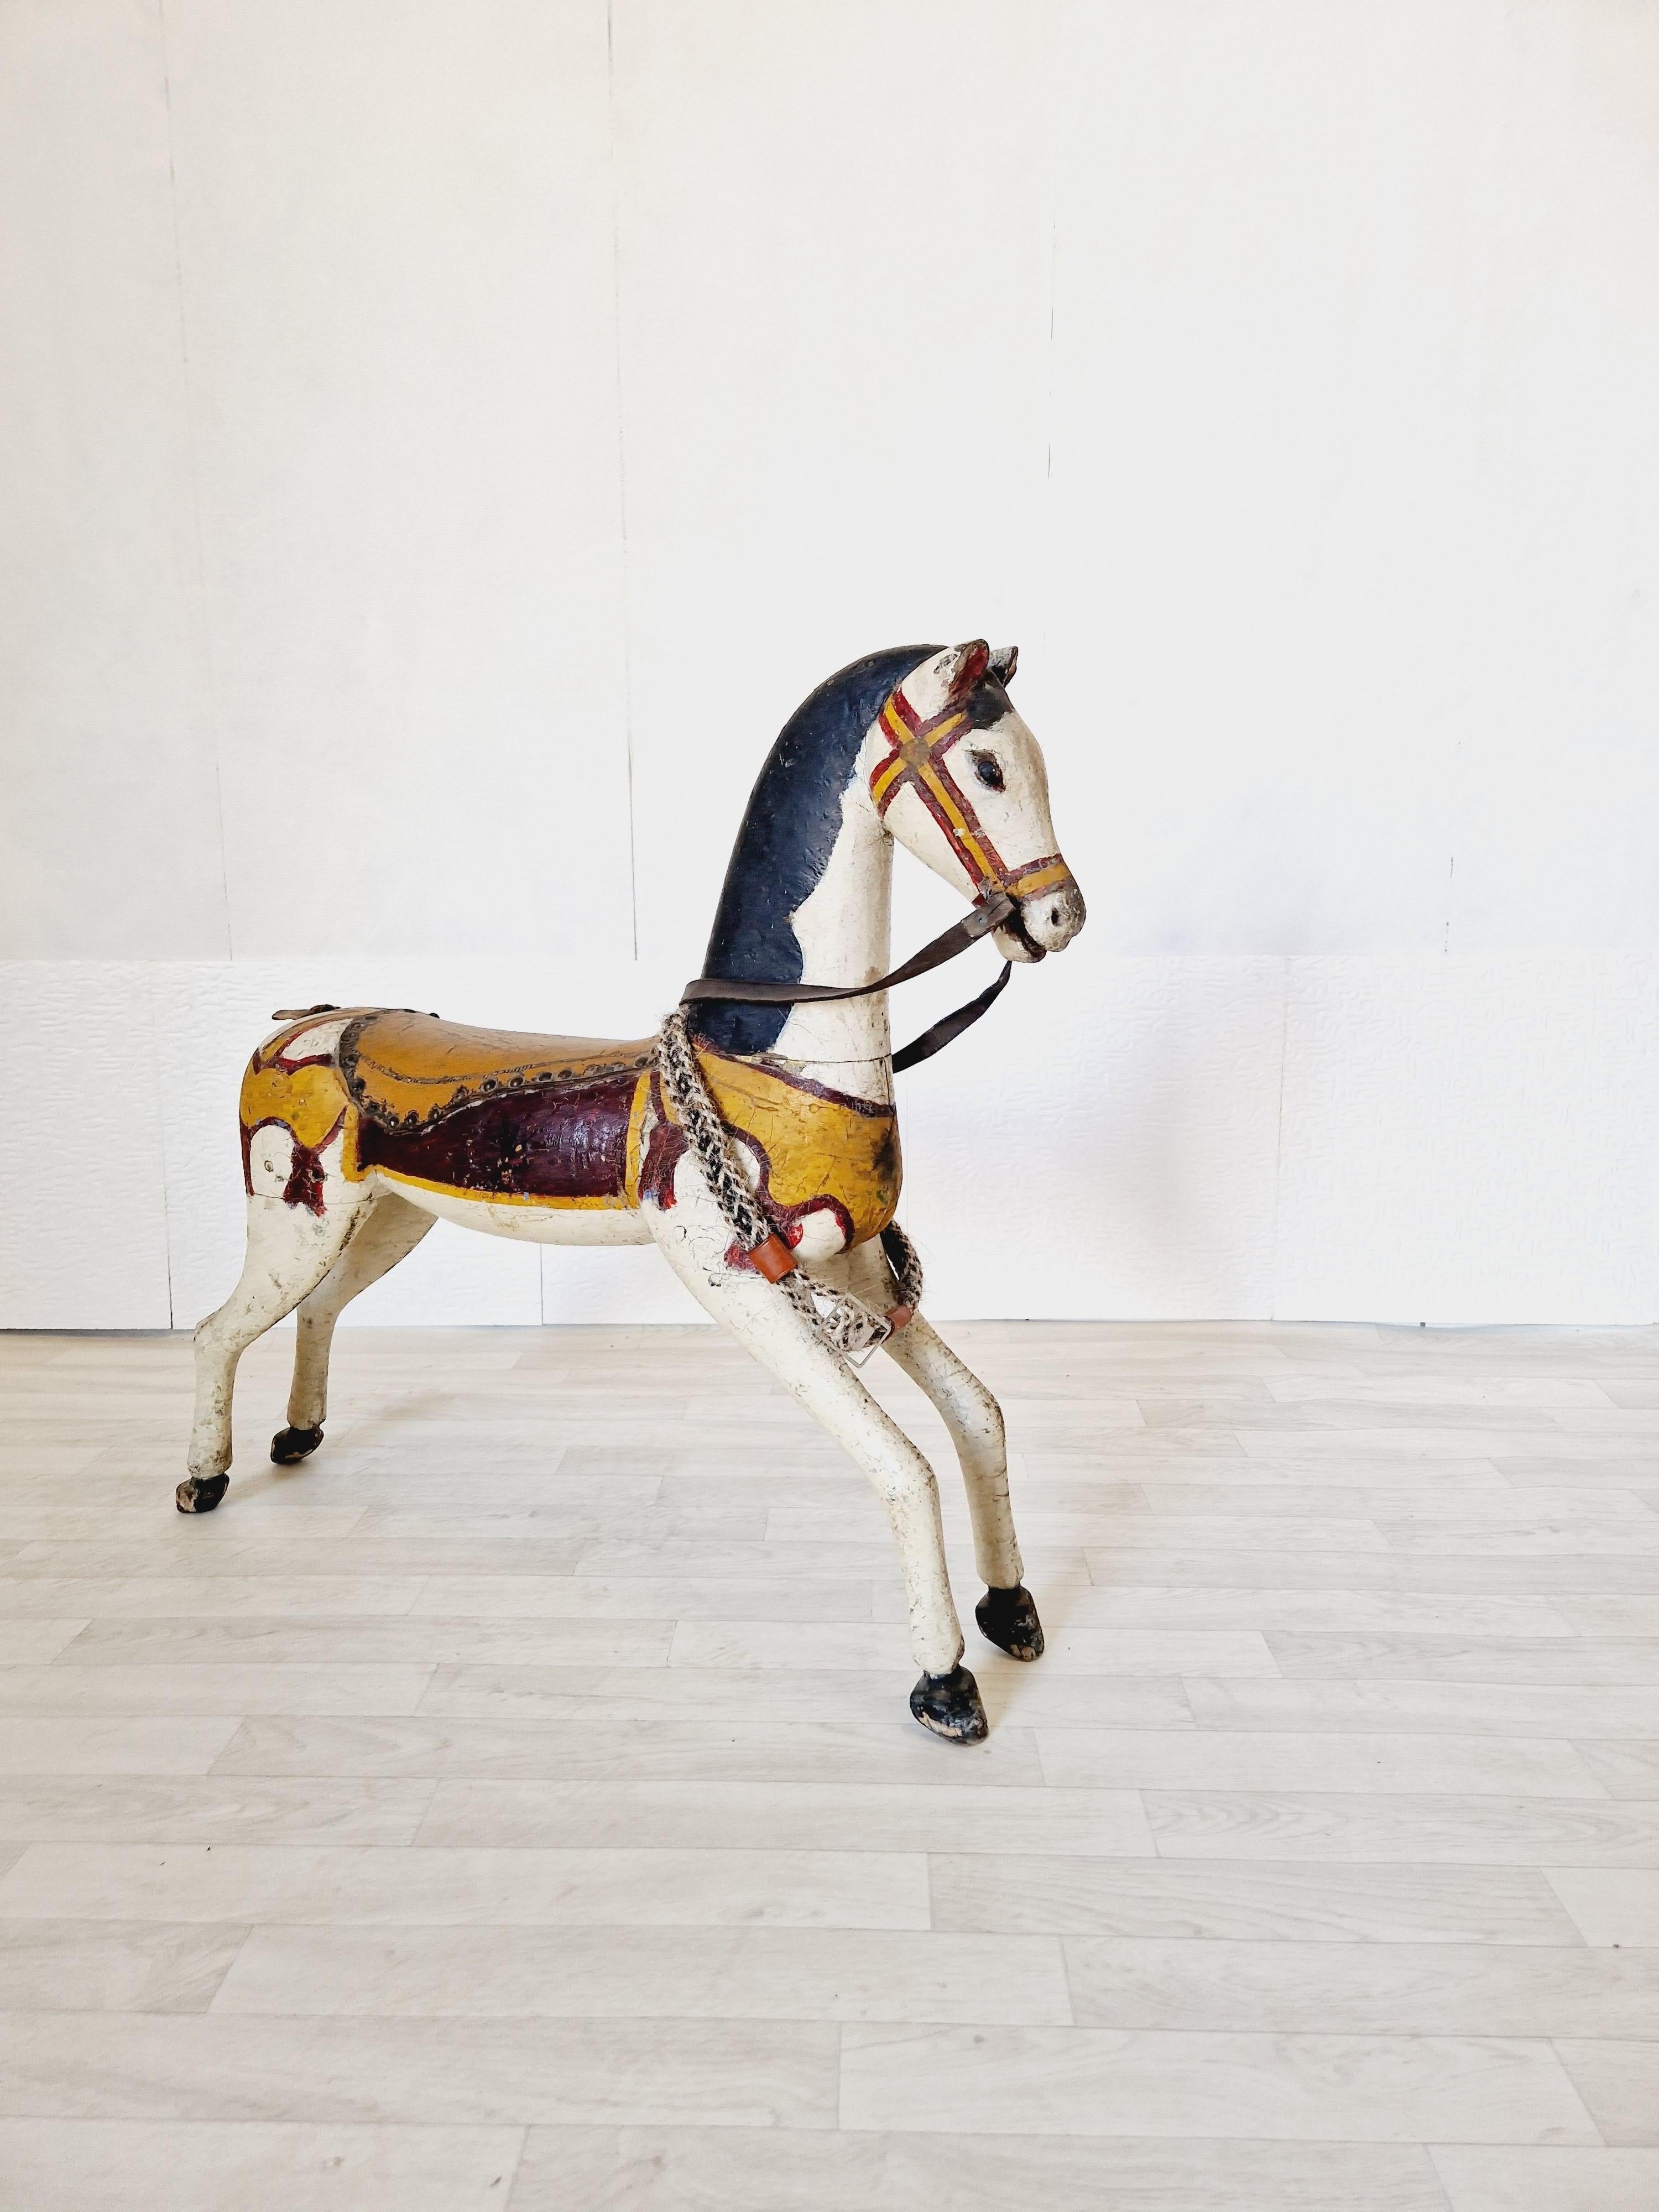 This amazing piece of Collectable Fairground Memorabilia is highly decorative and I am sure was a well loved choice for the children riding the carousel in the Victorian times.


This antique carousel horse sculpture is a magnificent piece of